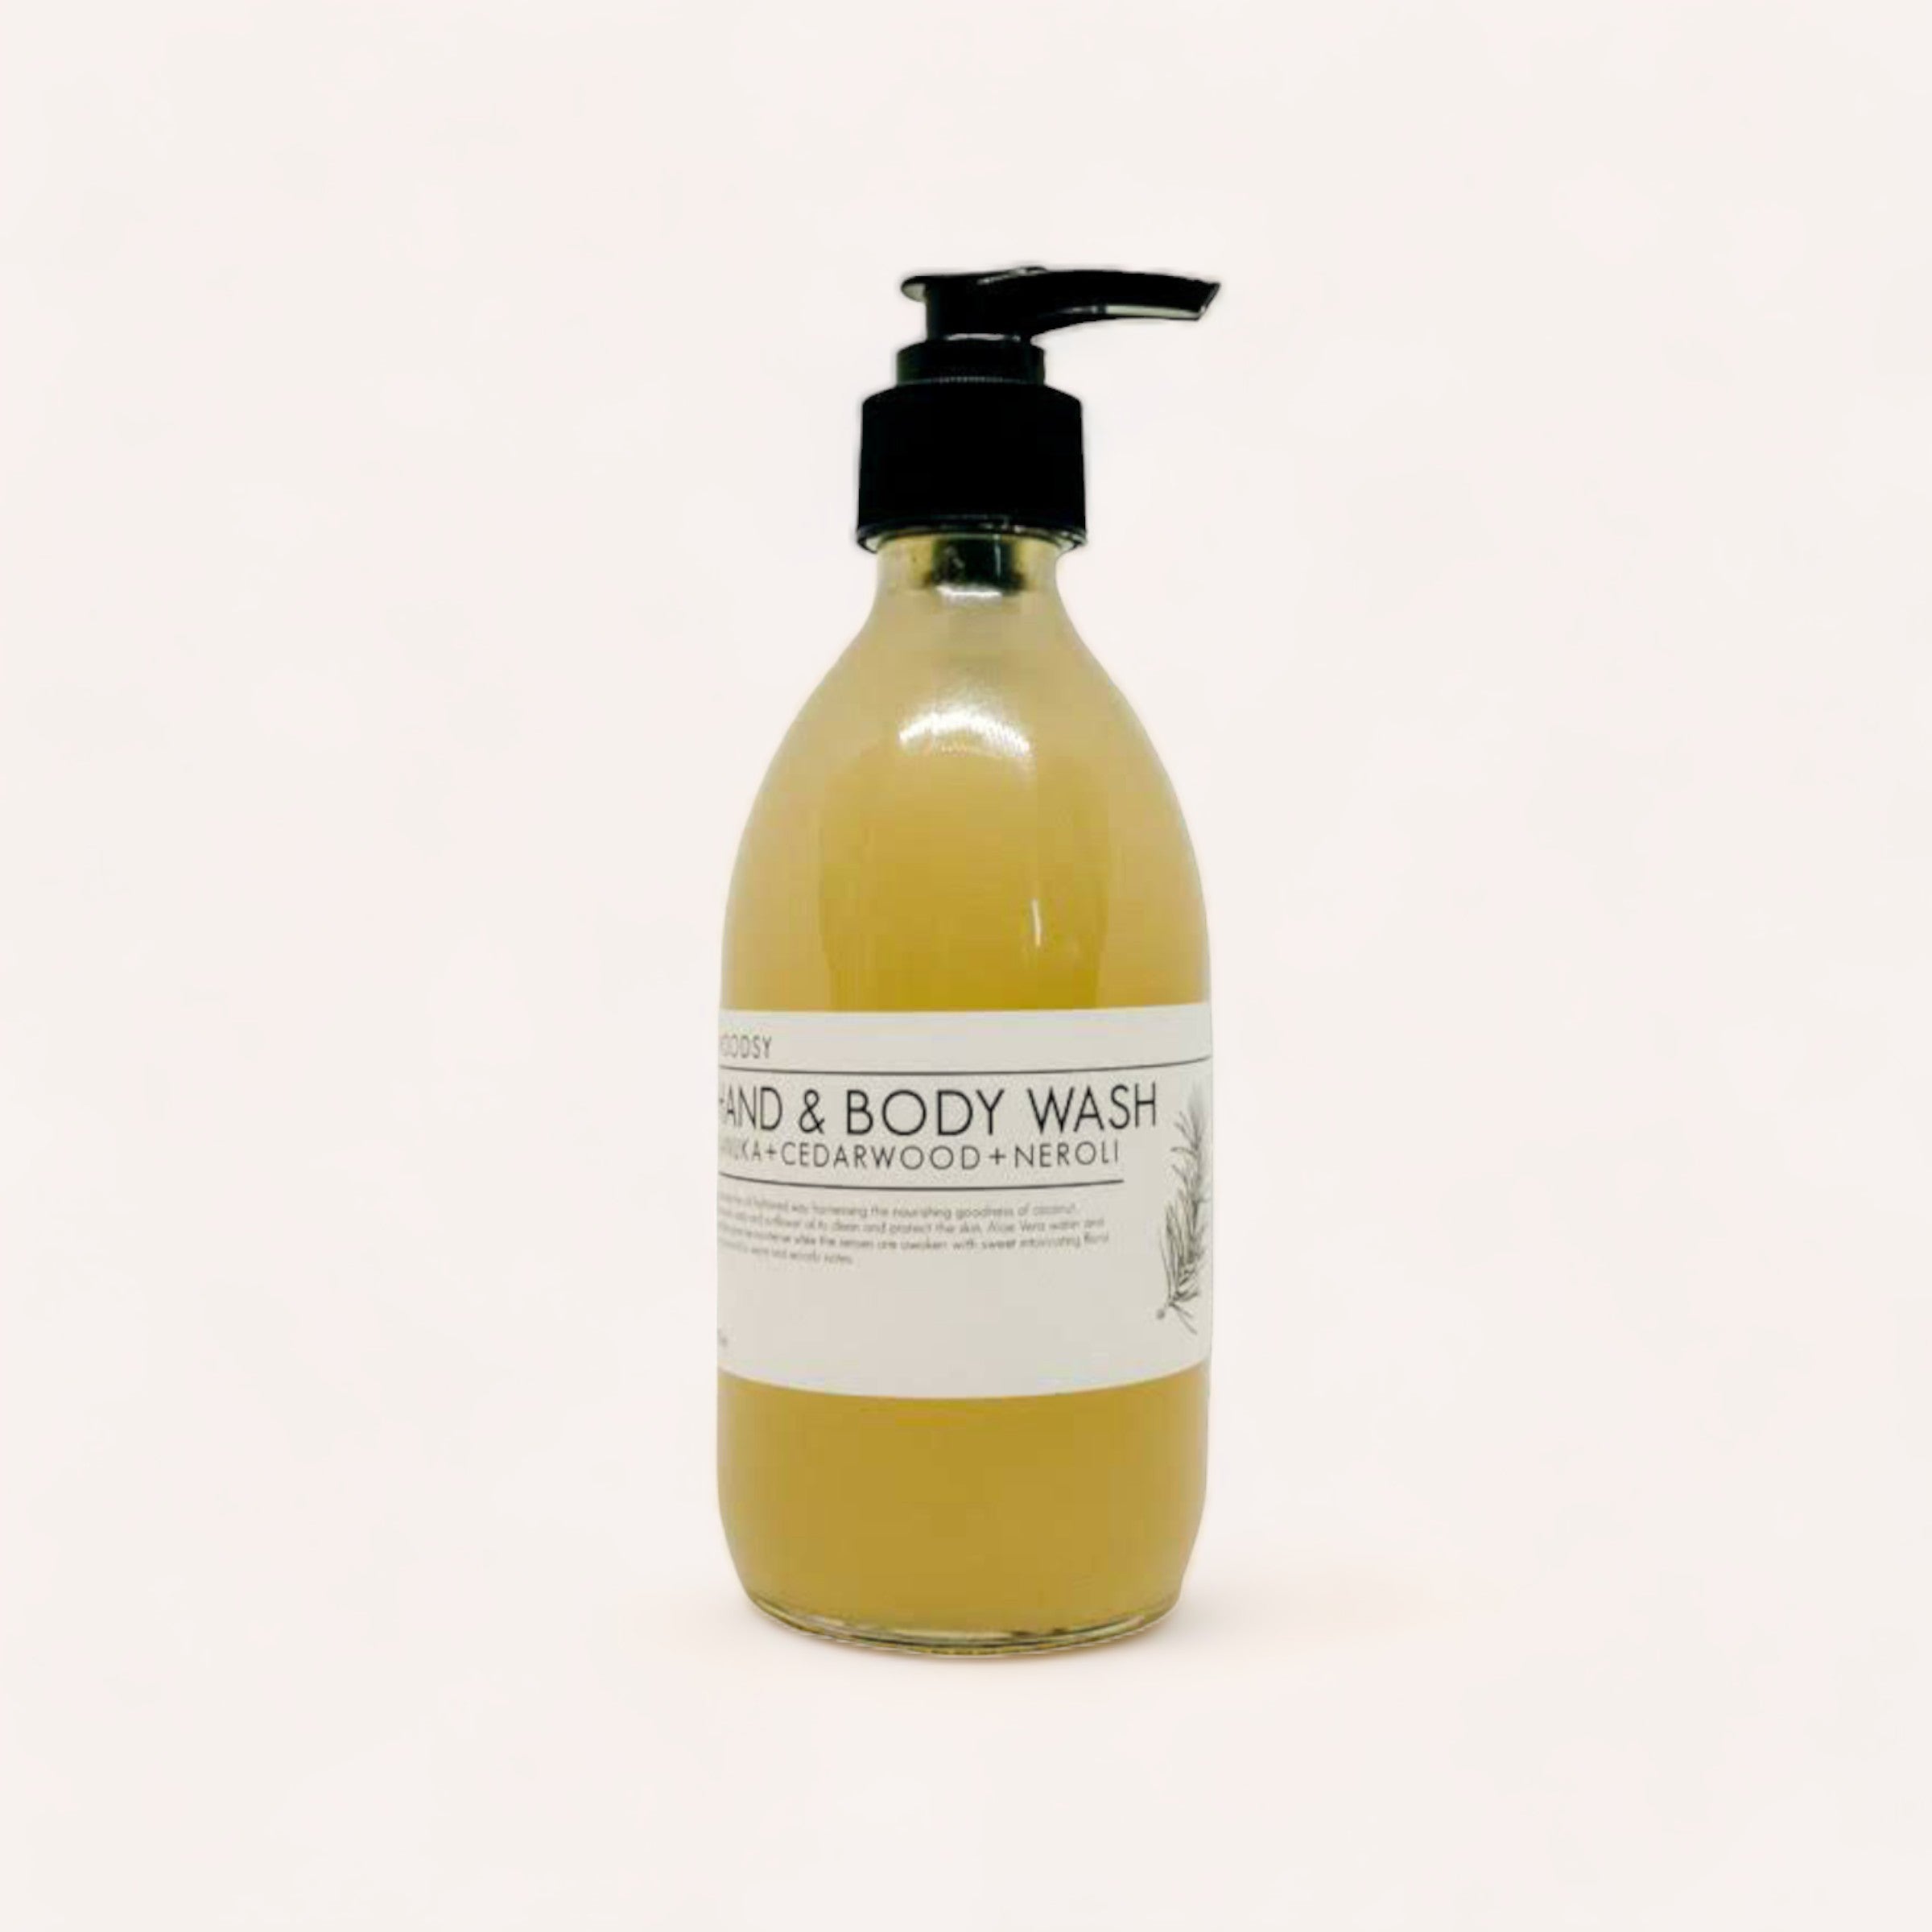 A transparent bottle of Hand & Body Wash - Kanuka, Cedarwood & Neroli by Woodsy Botanics, liquid hand and body wash with a black pump dispenser on a white background, featuring Aloe Vera water.